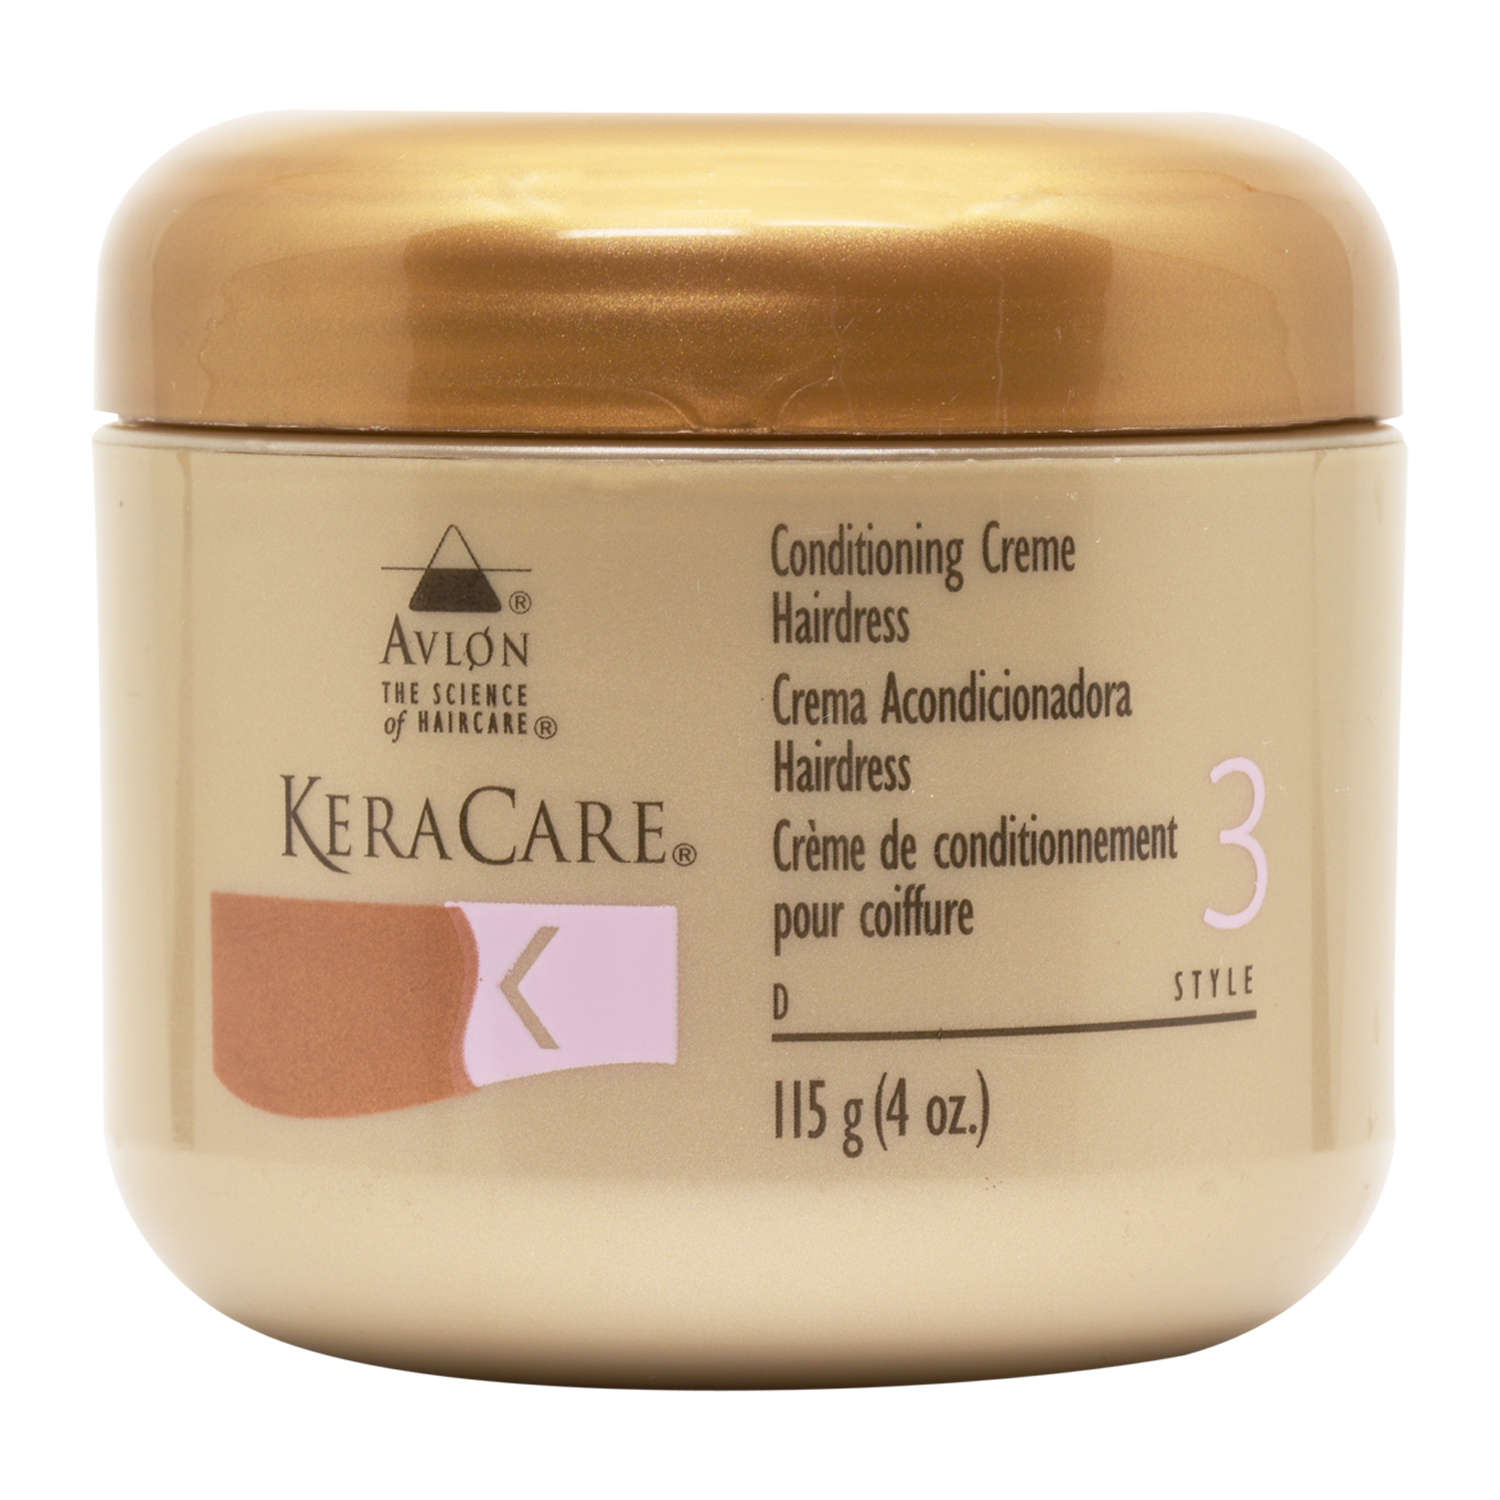 Keracare Conditioning Crème Hairdress 8oz